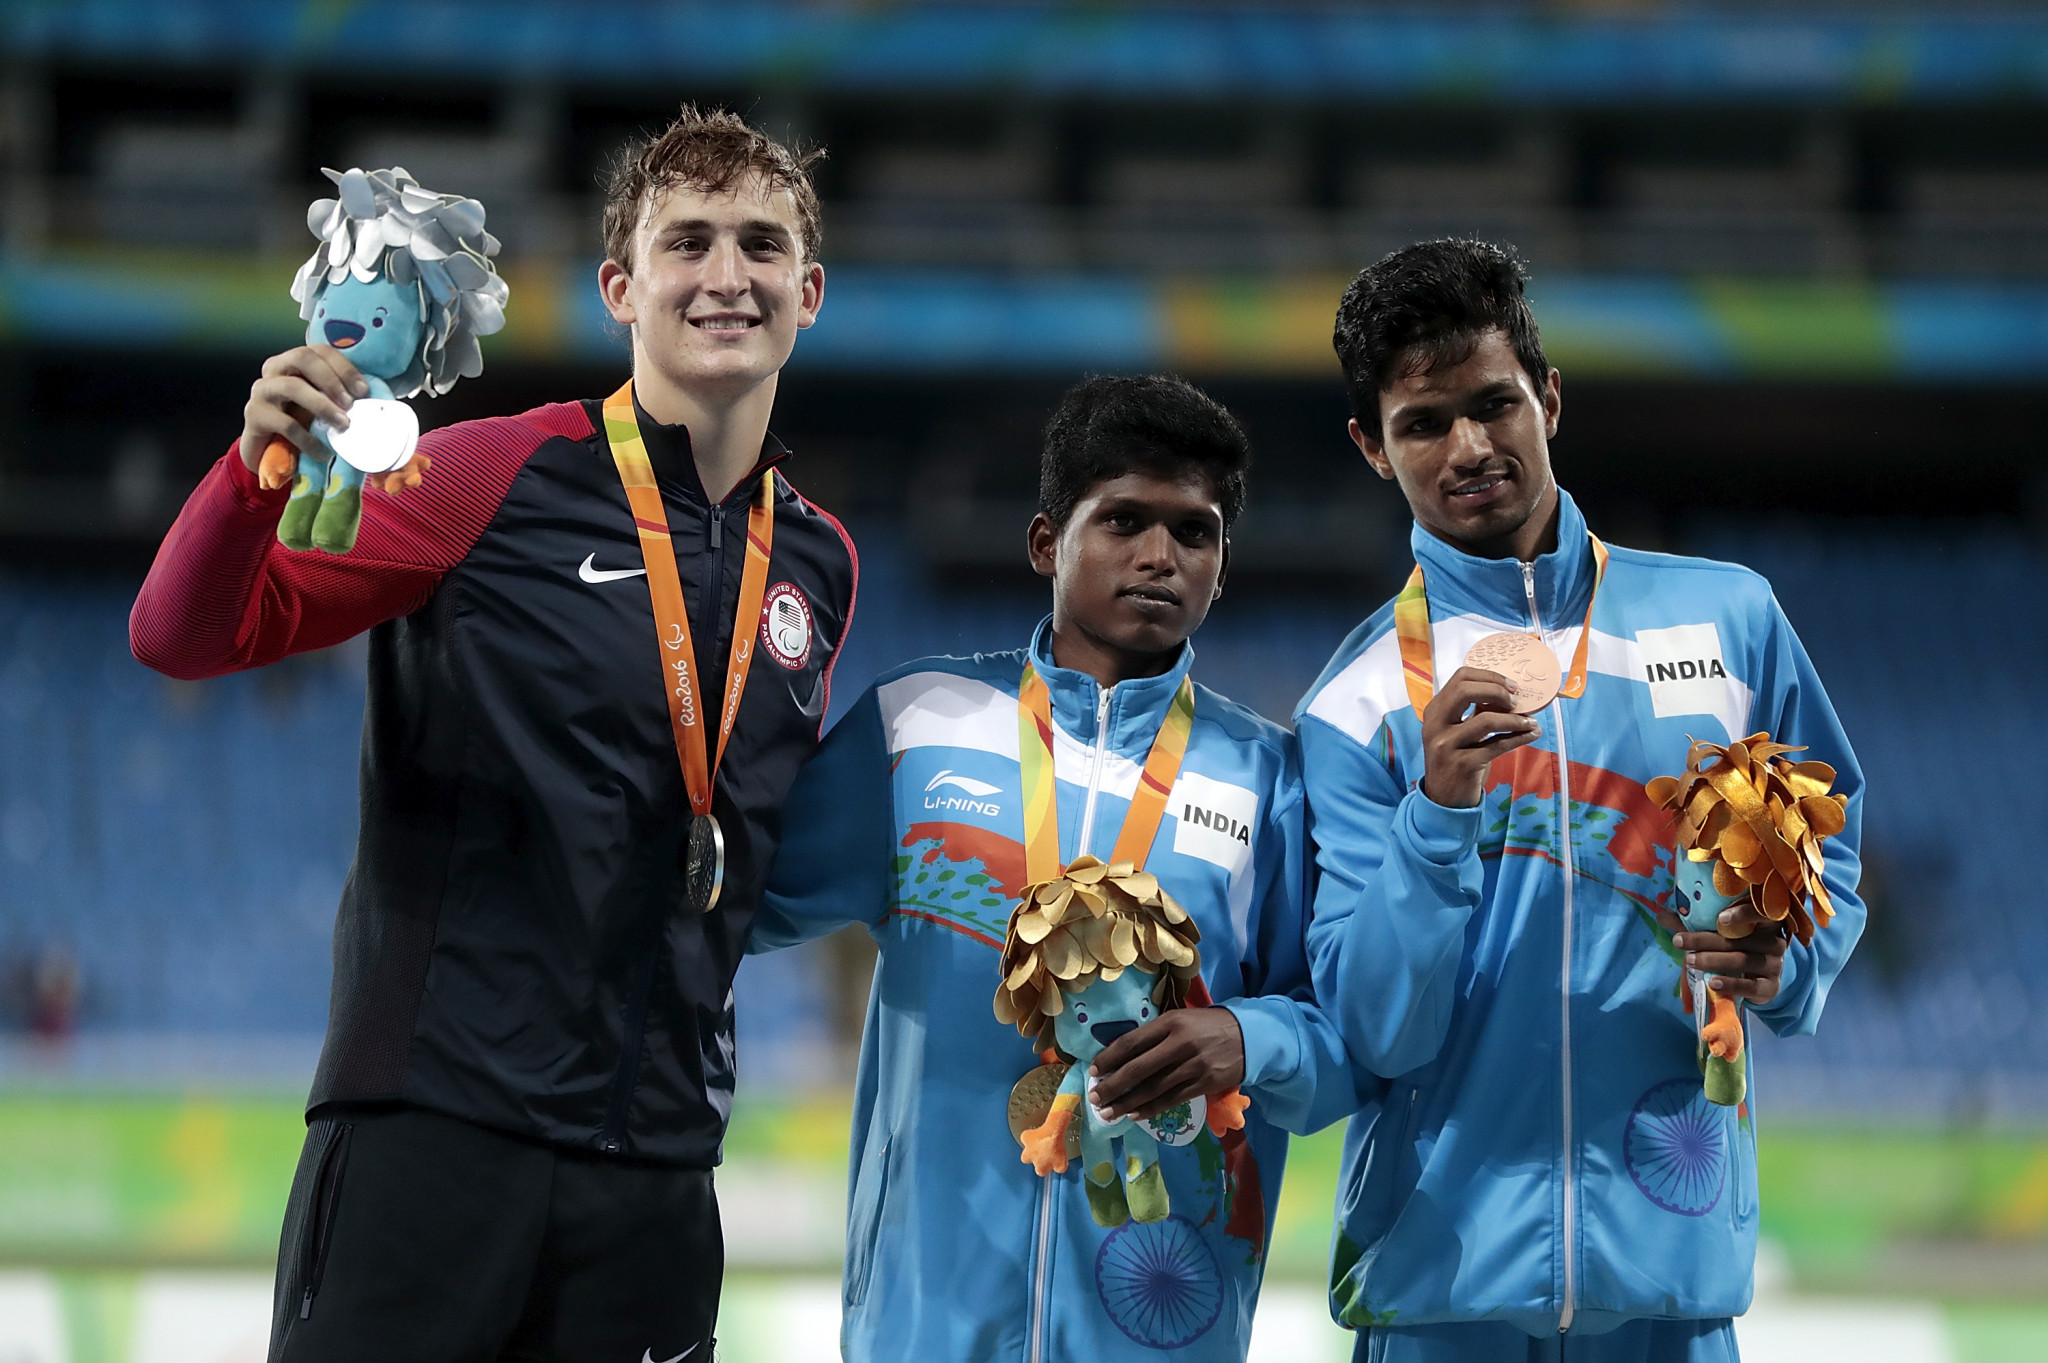 Devendra Jhajharia and Varun Singh Bhati earned gold and bronze Paralympic medals for India in the men's F46 javelin at Rio 2016 ©Getty Images